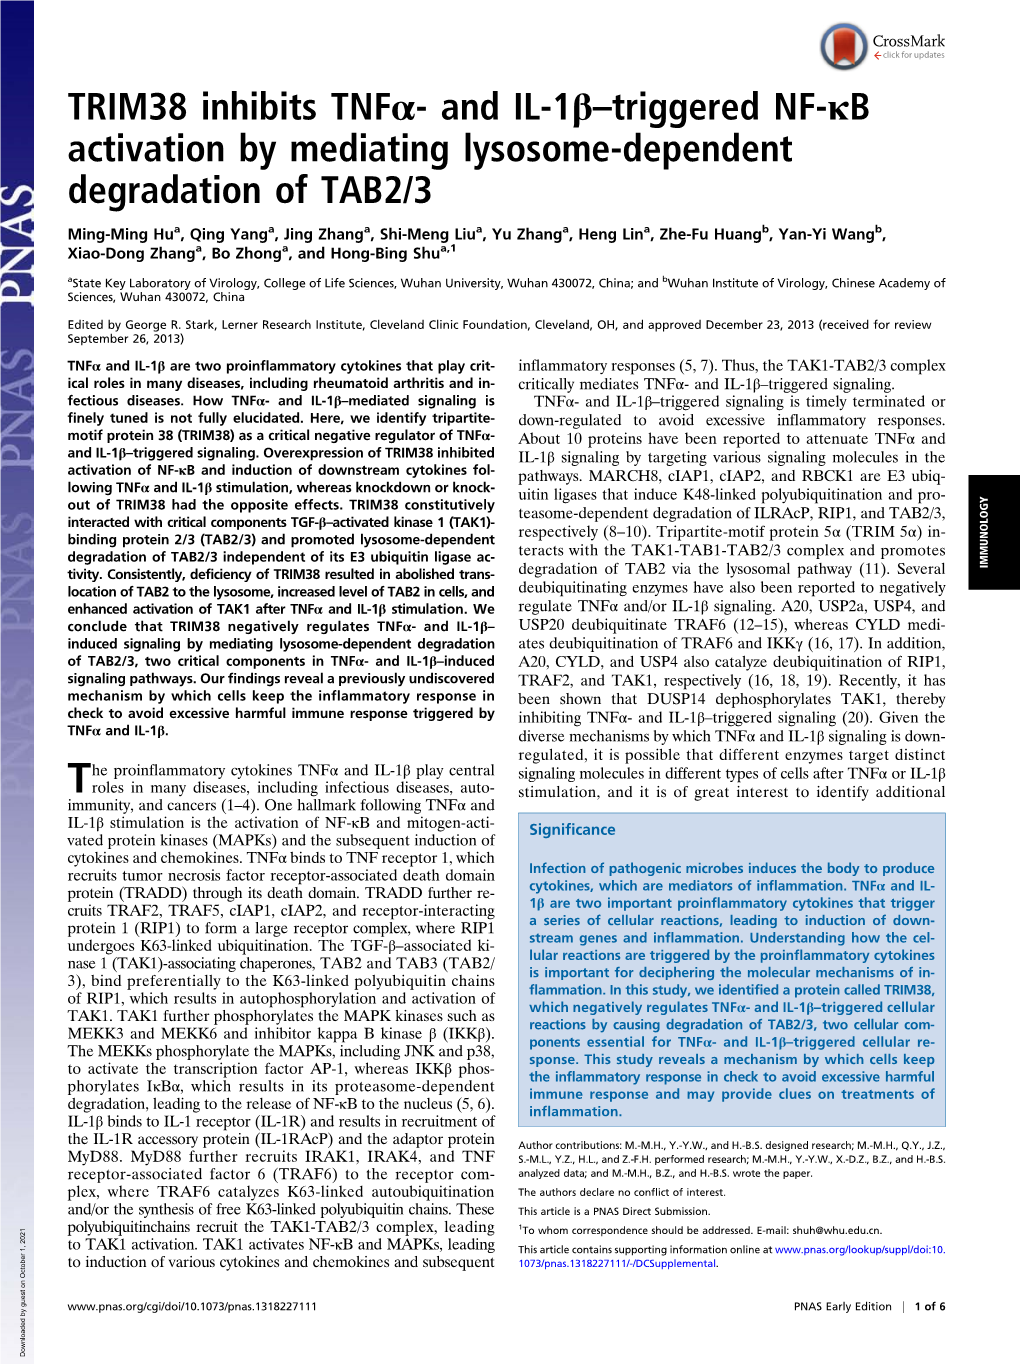 TRIM38 Inhibits Tnfα- and IL-1Β–Triggered NF-Κb Activation by Mediating Lysosome-Dependent Degradation of TAB2/3